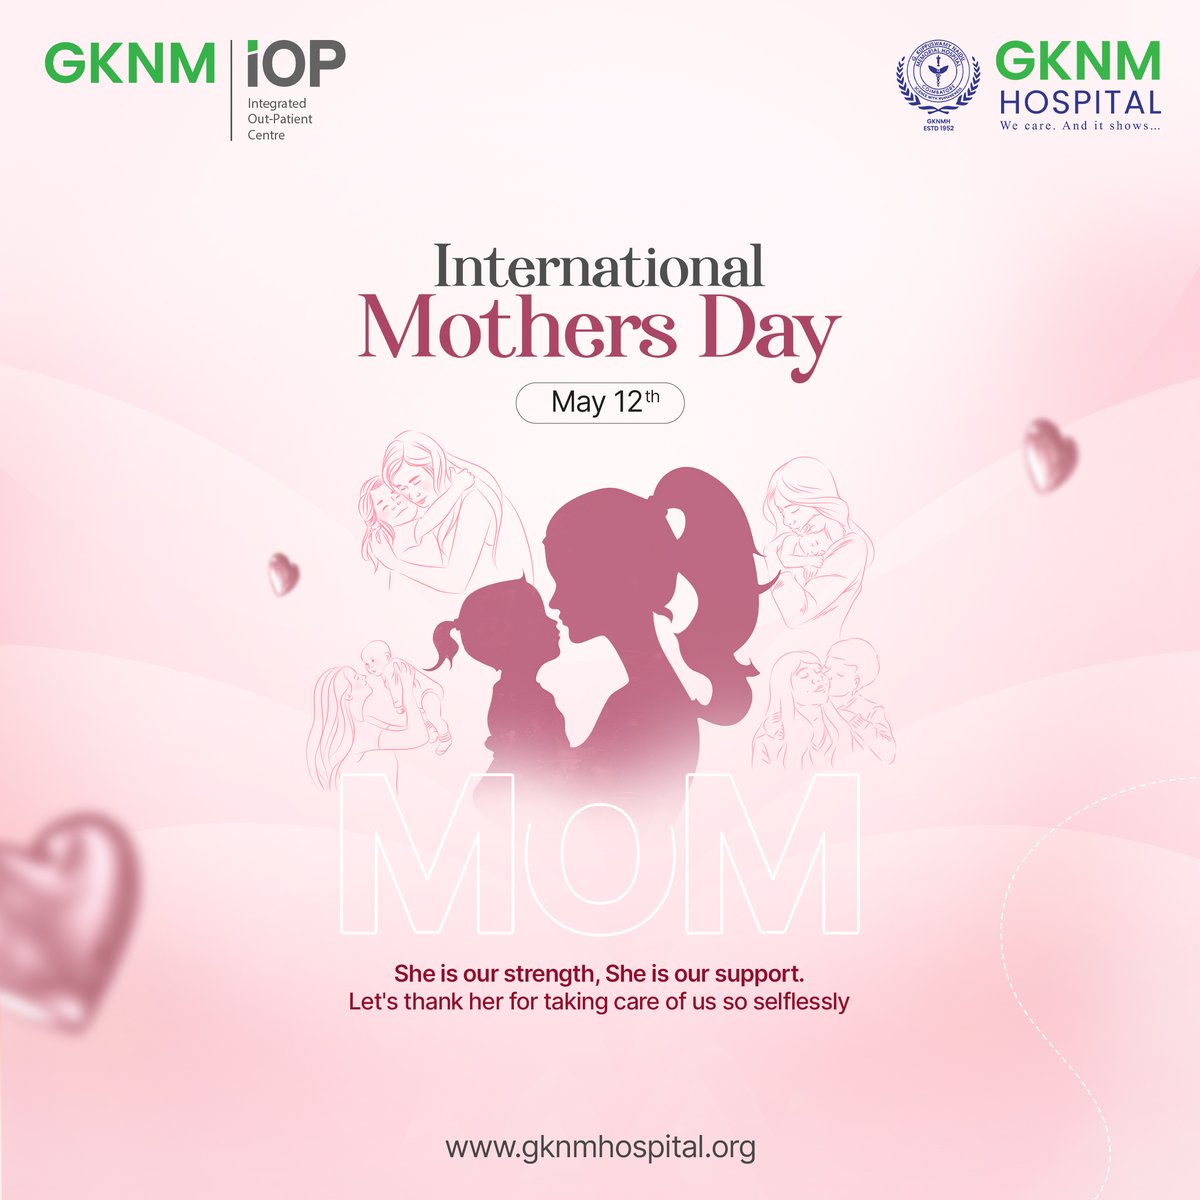 A mother is a synonym of irreplaceable and unconditional love Happy Mother's Day to all the mothers and the mom-to be's #HappyMothersDay #MothersLove #Motherhood #Endlesslove #Mothersday2024 #GKNMiOP #GKNMHospital #GKNM #GKNMH